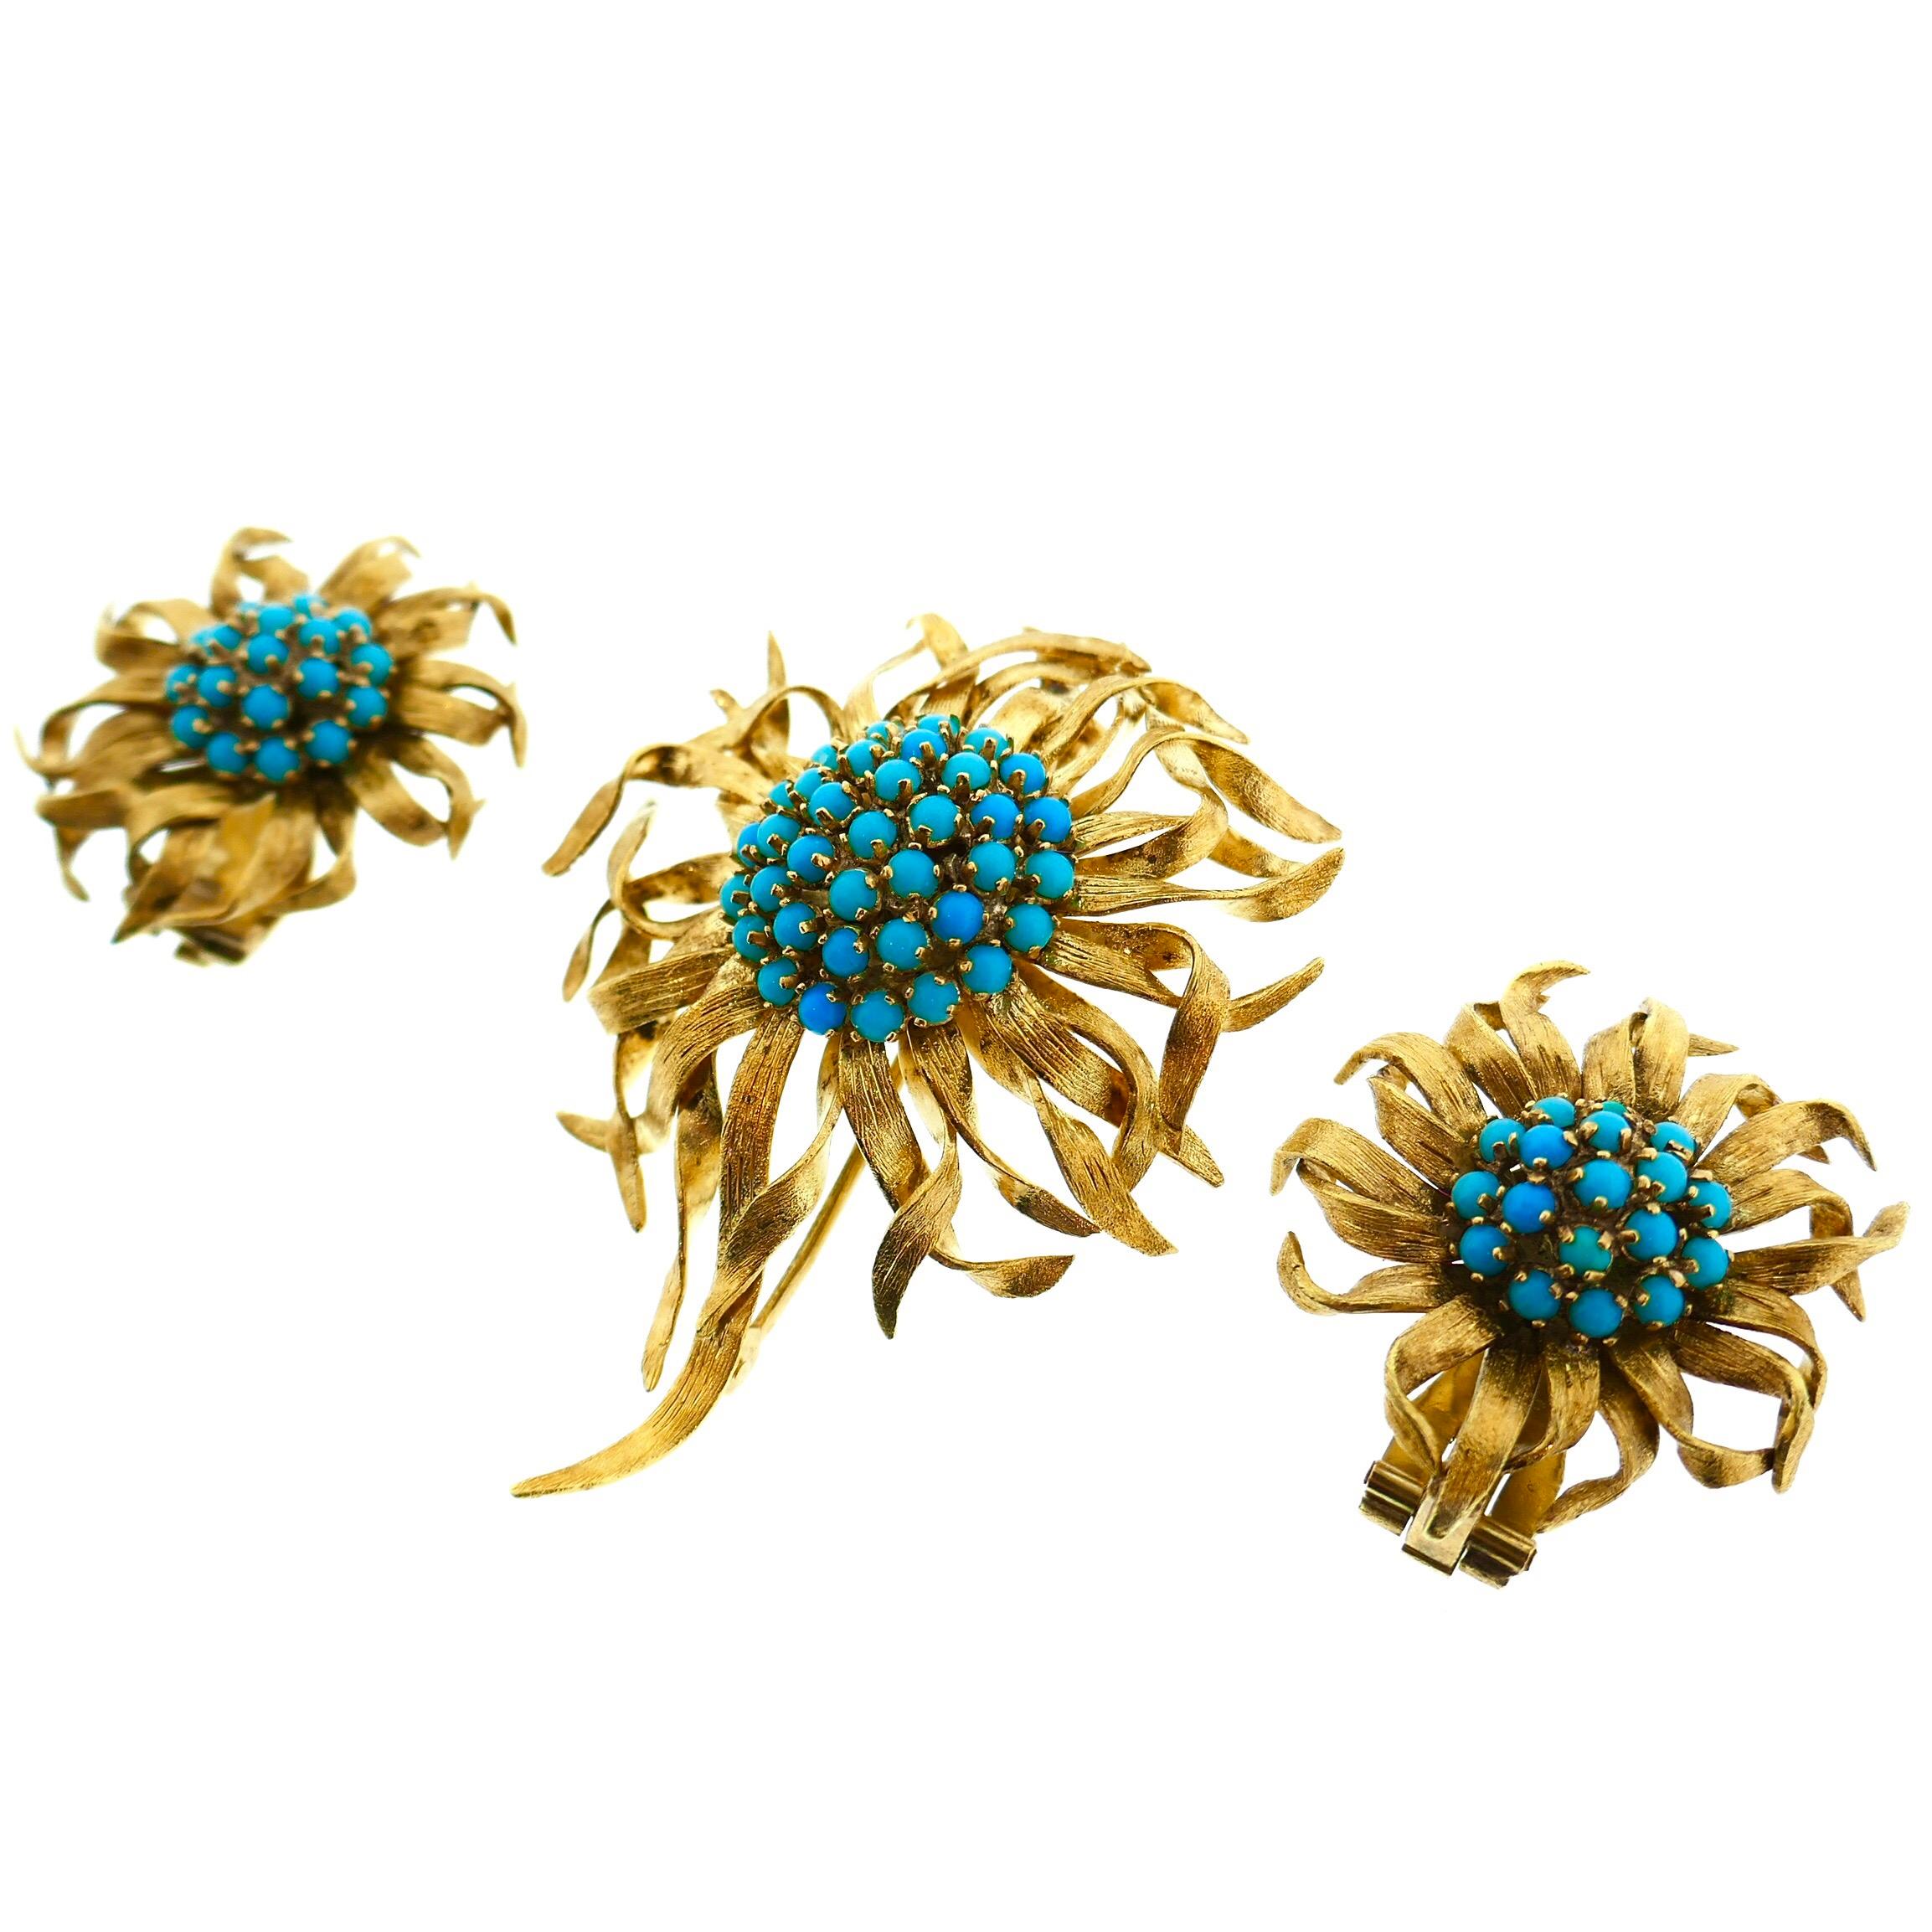 Cartier Paris 18 Karat Yellow Gold Turquoise Flower Brooch and Earrings Set

This is a stunning Cartier Paris Flower Brooch and Earrings set. Cartier turquoise pieces from the 1940 are very rare making this opportunity to have a set of Cartier